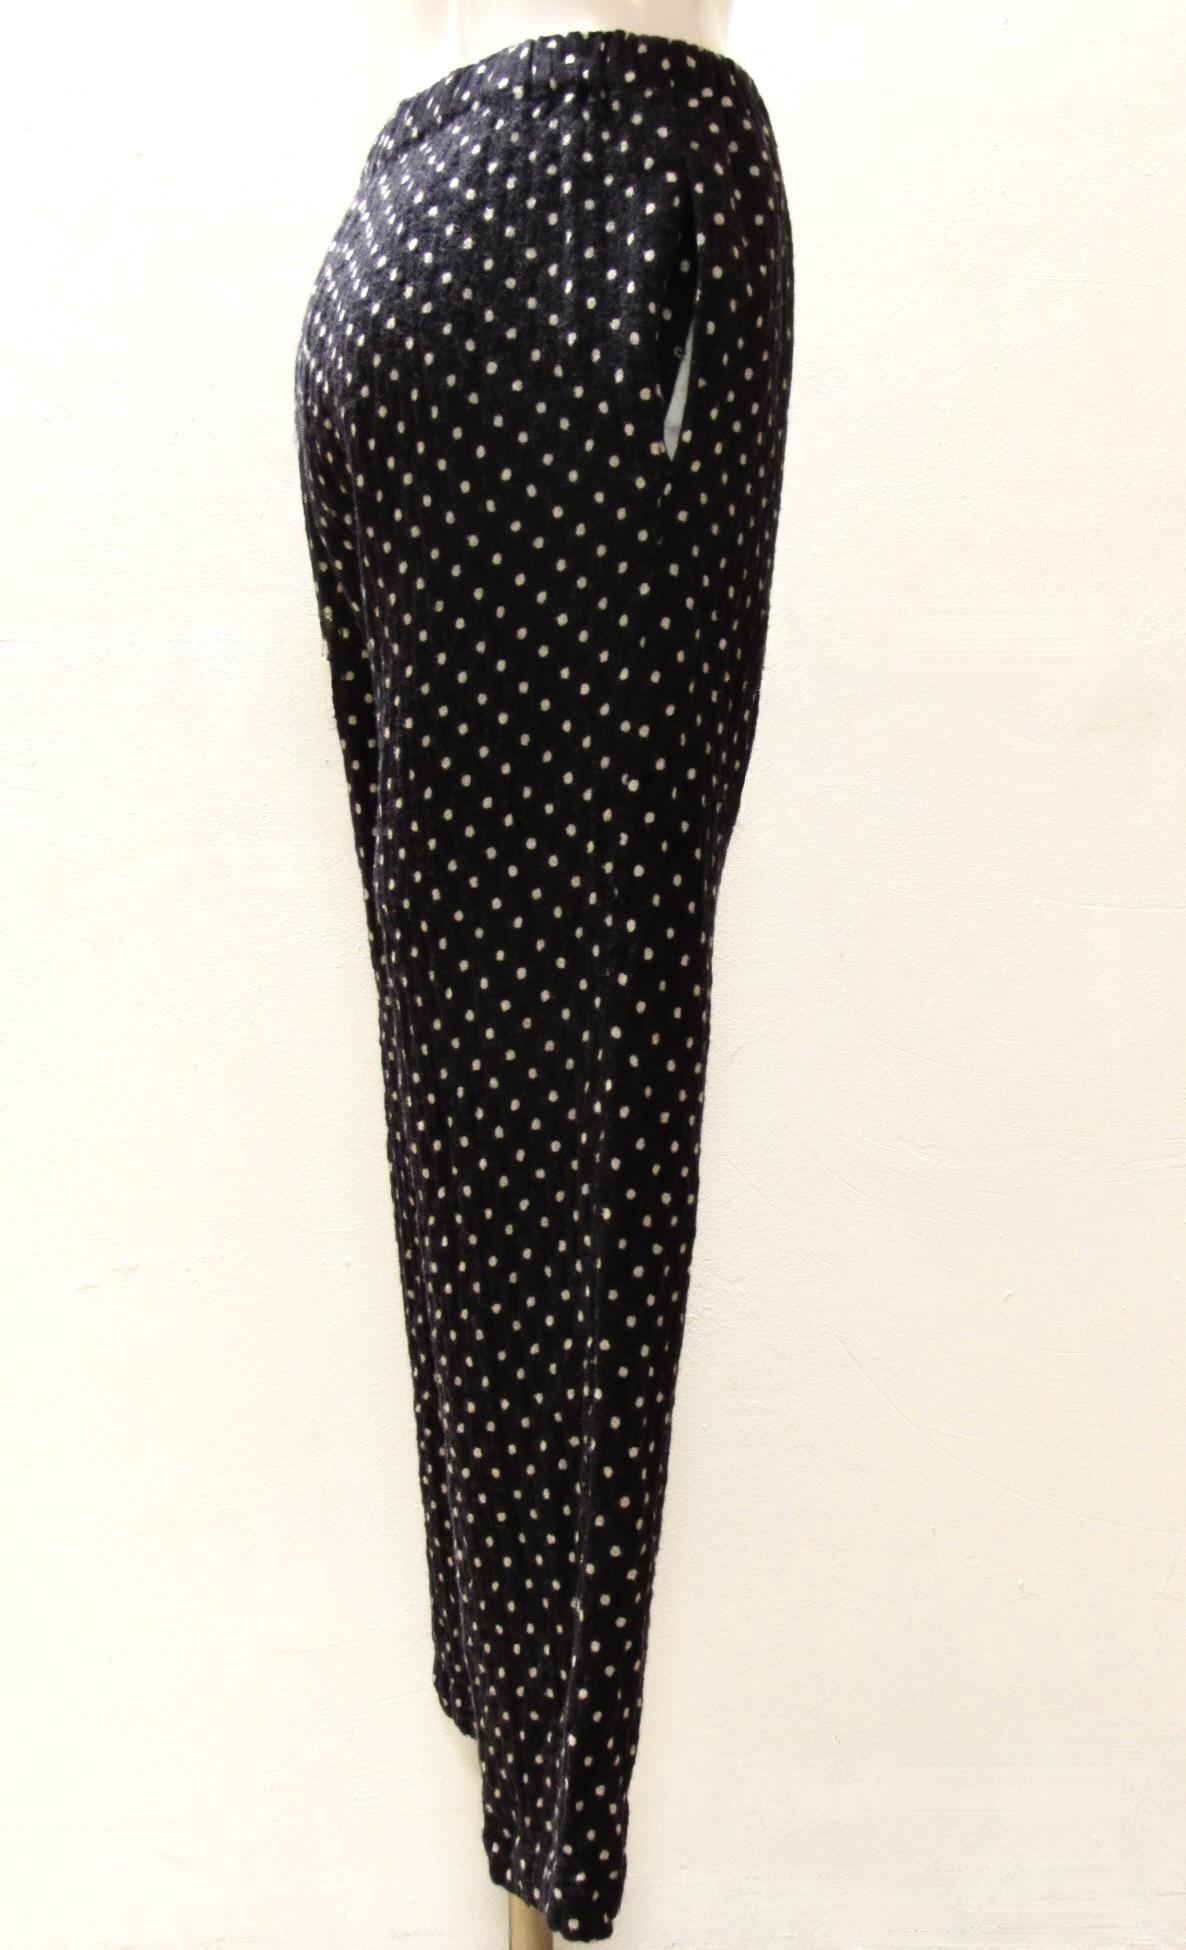 NWT Vintage Comme des Garçons black and white polkadot print washed wool relaxed fit drawstring pants.